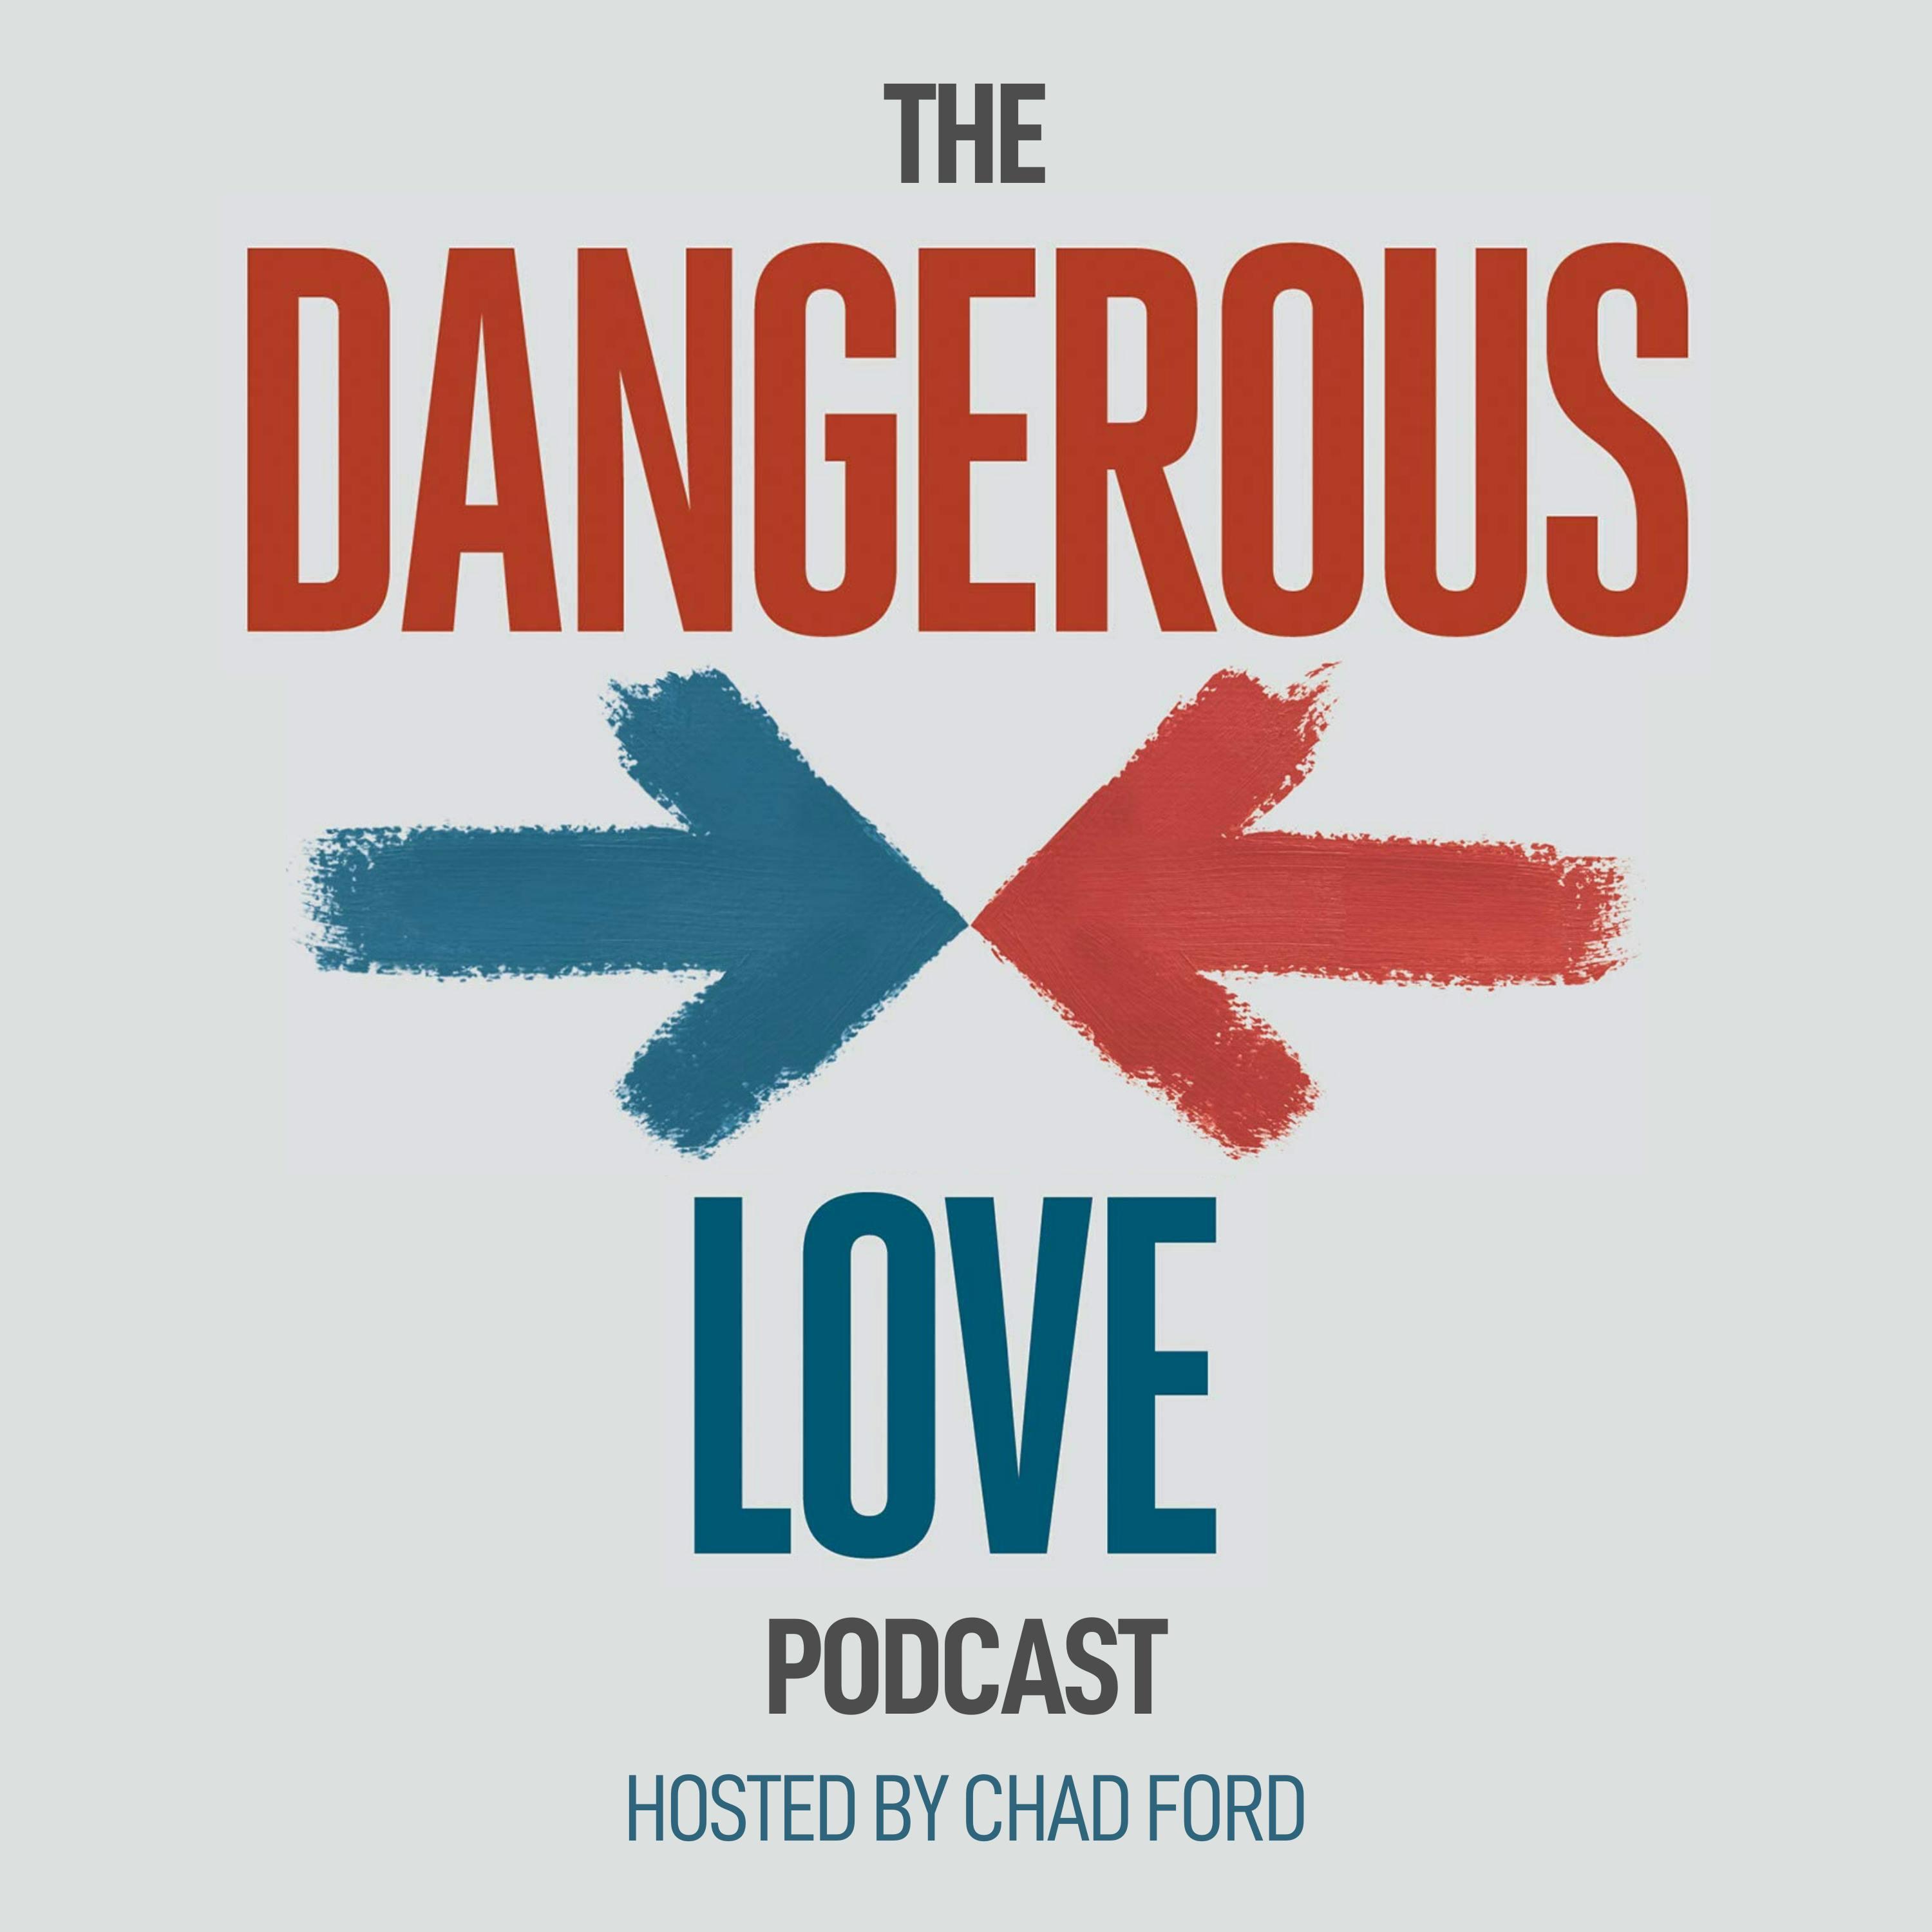 Show poster of Dangerous Love Podcast